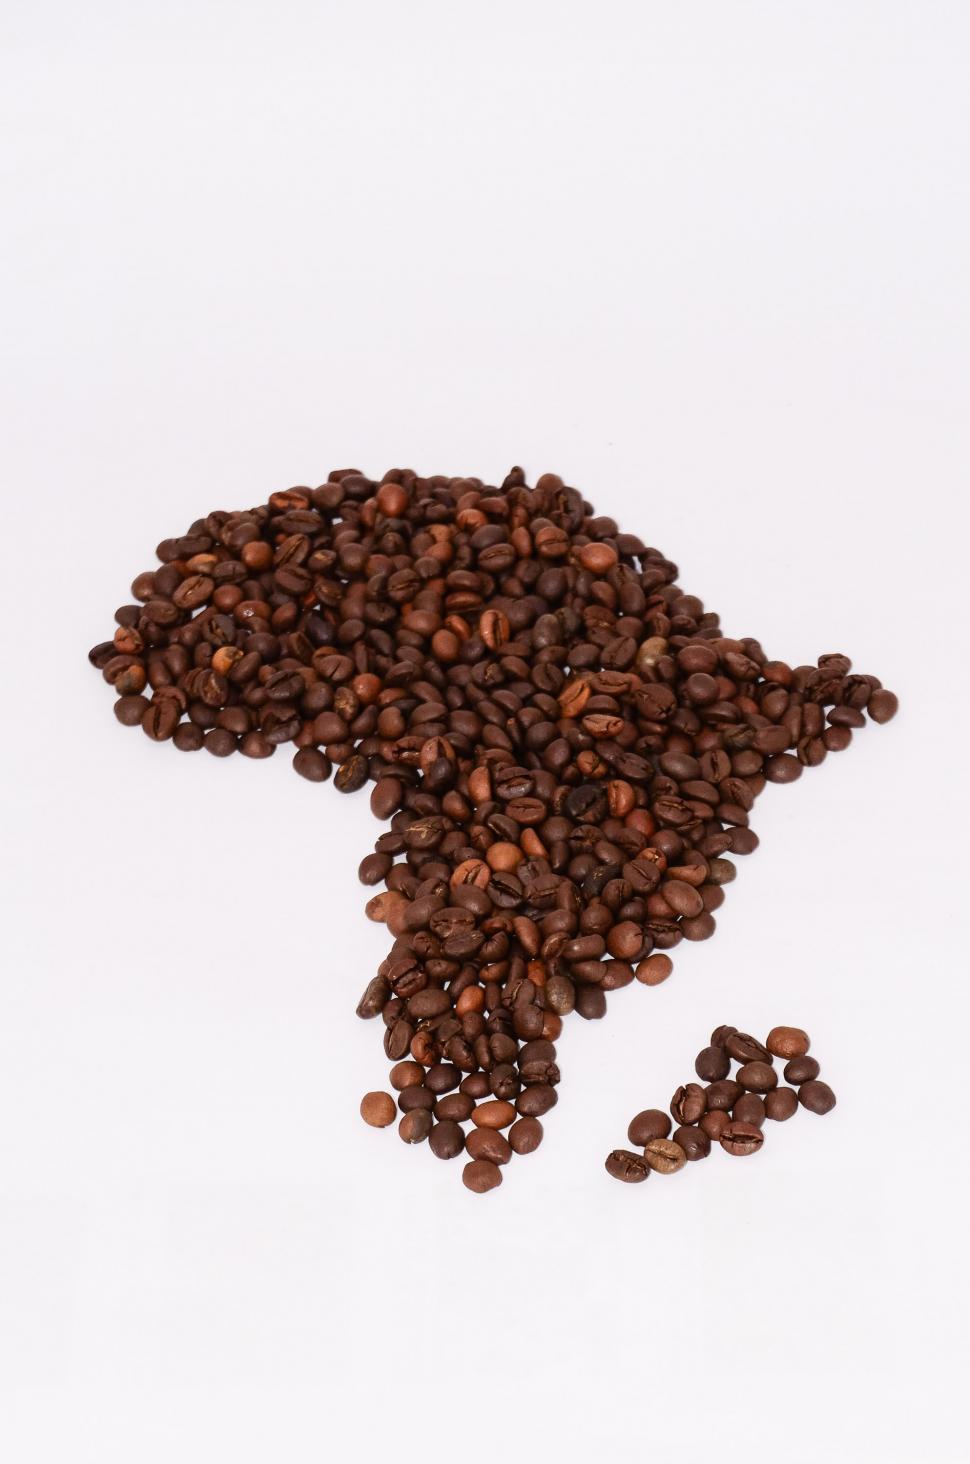 Free Image of A Pile of Coffee Beans on a White Background 